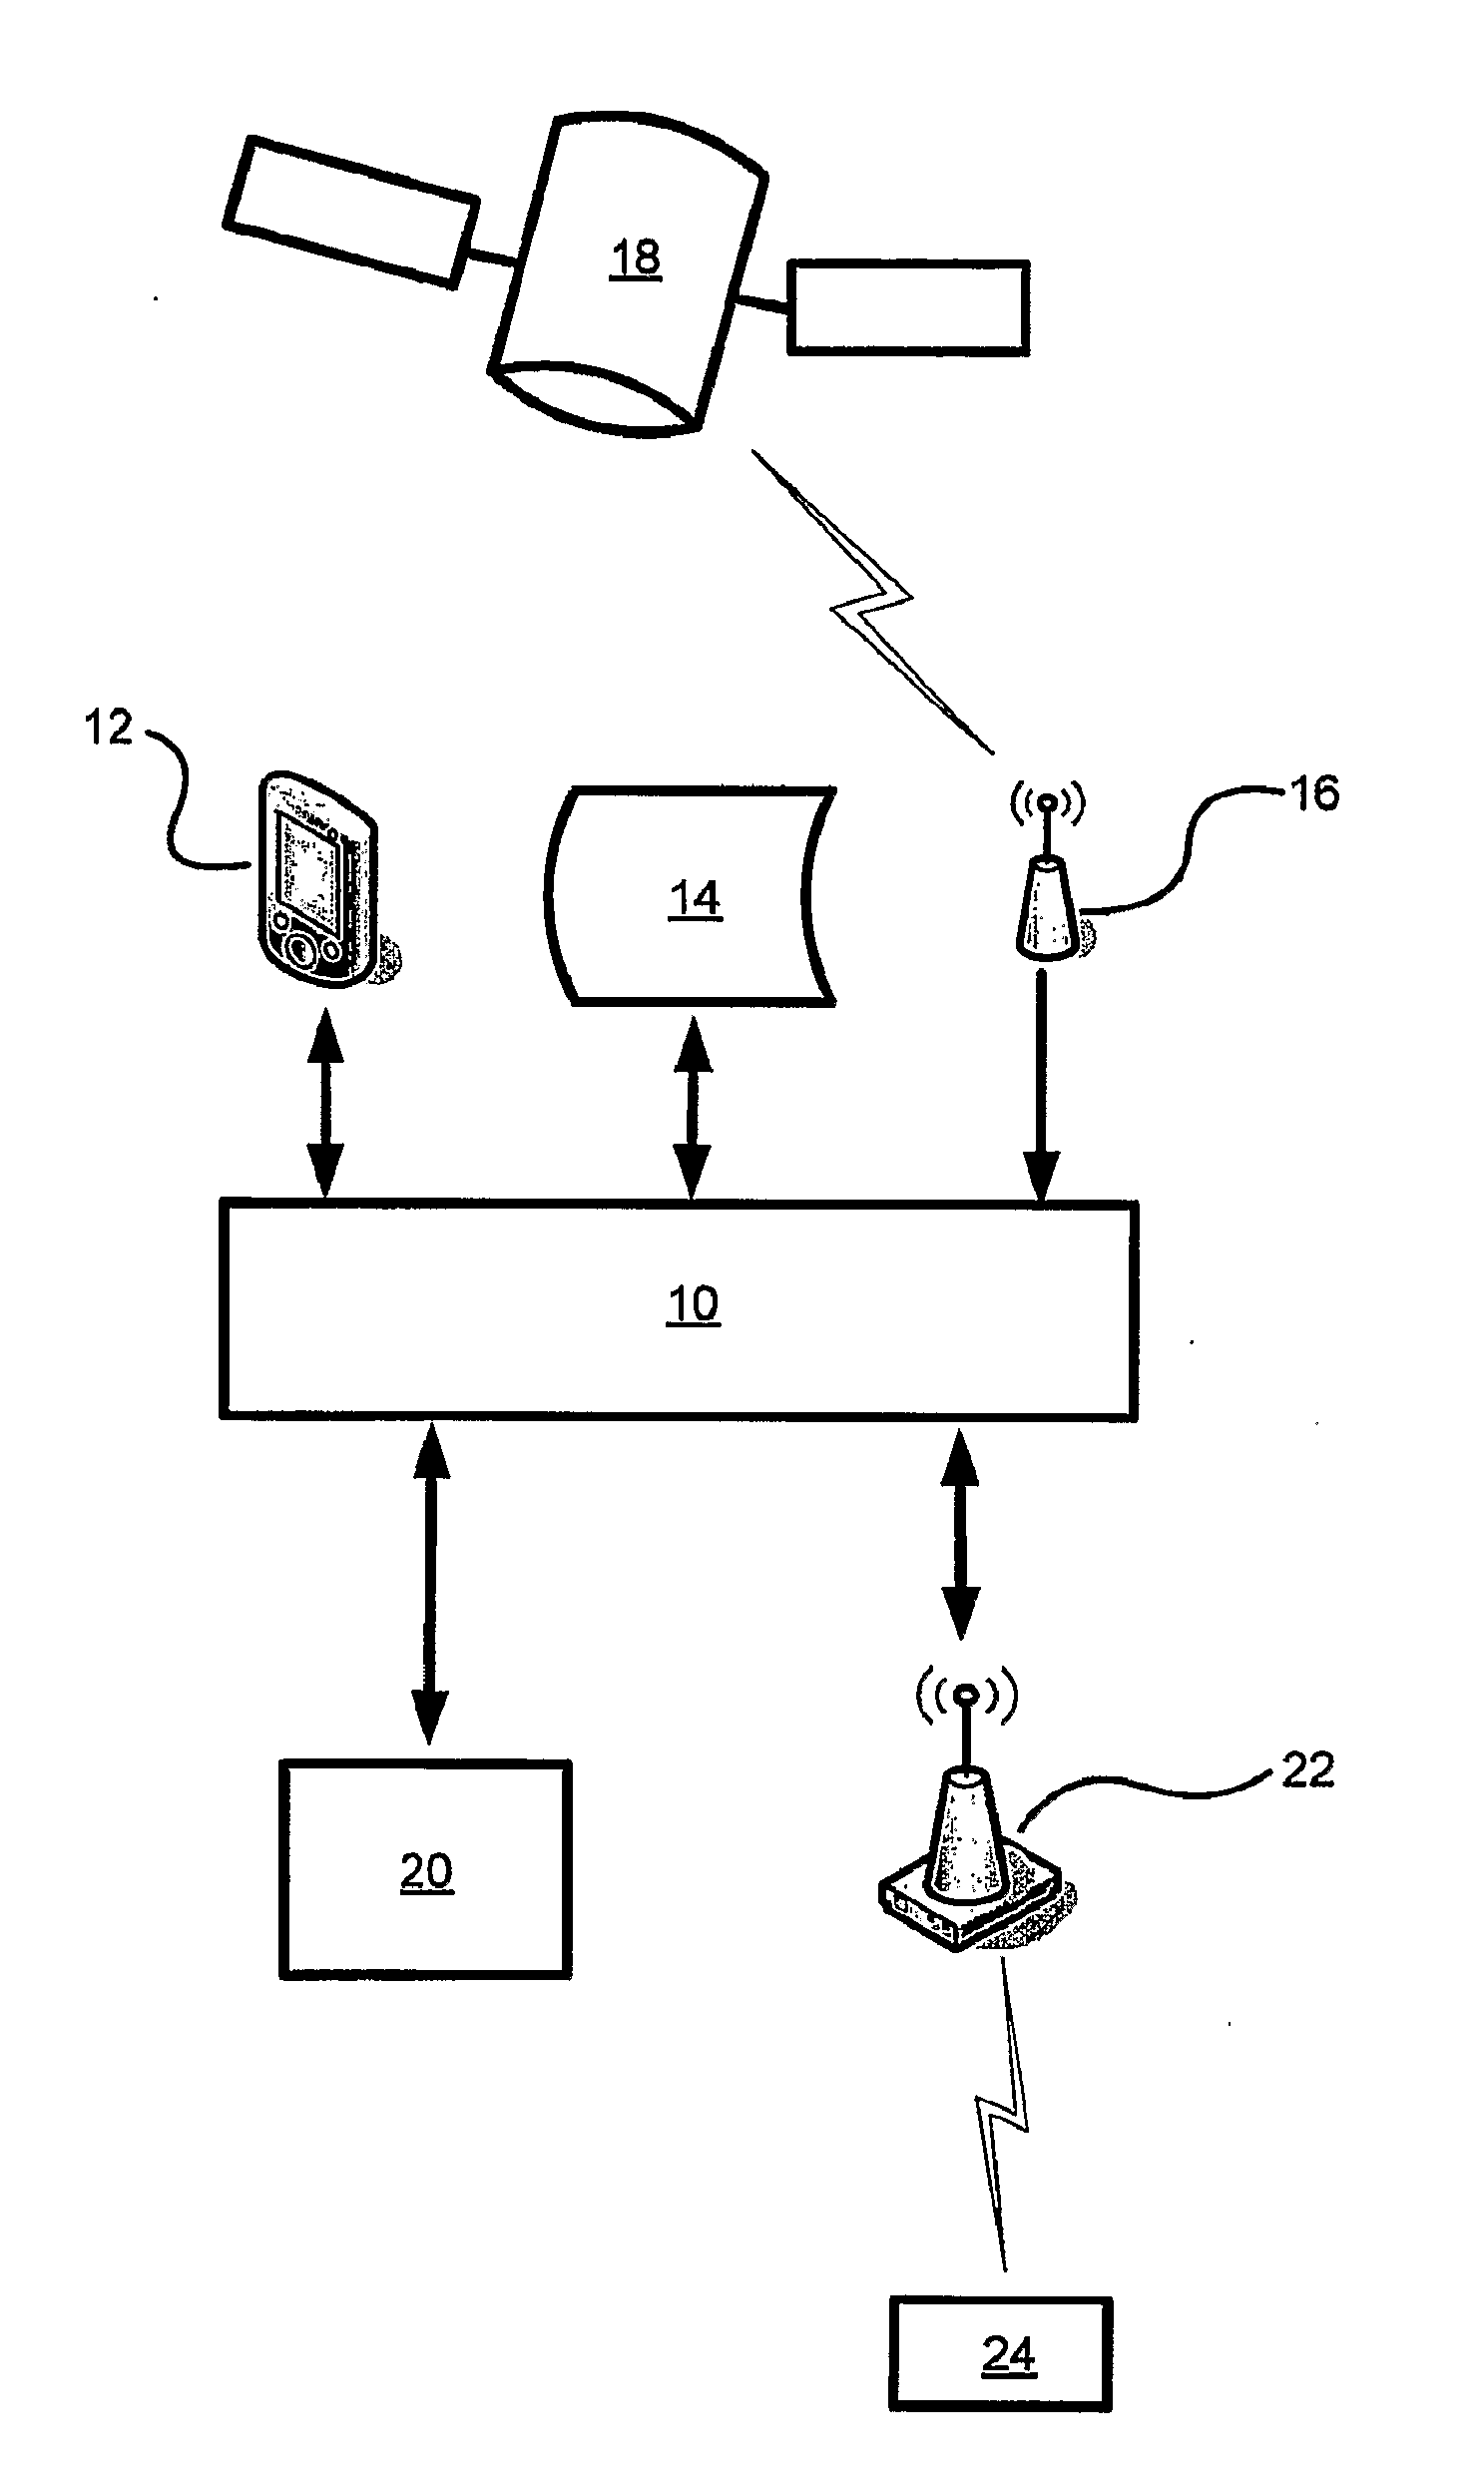 Method and system for controlling vehicles carrying hazardous materials